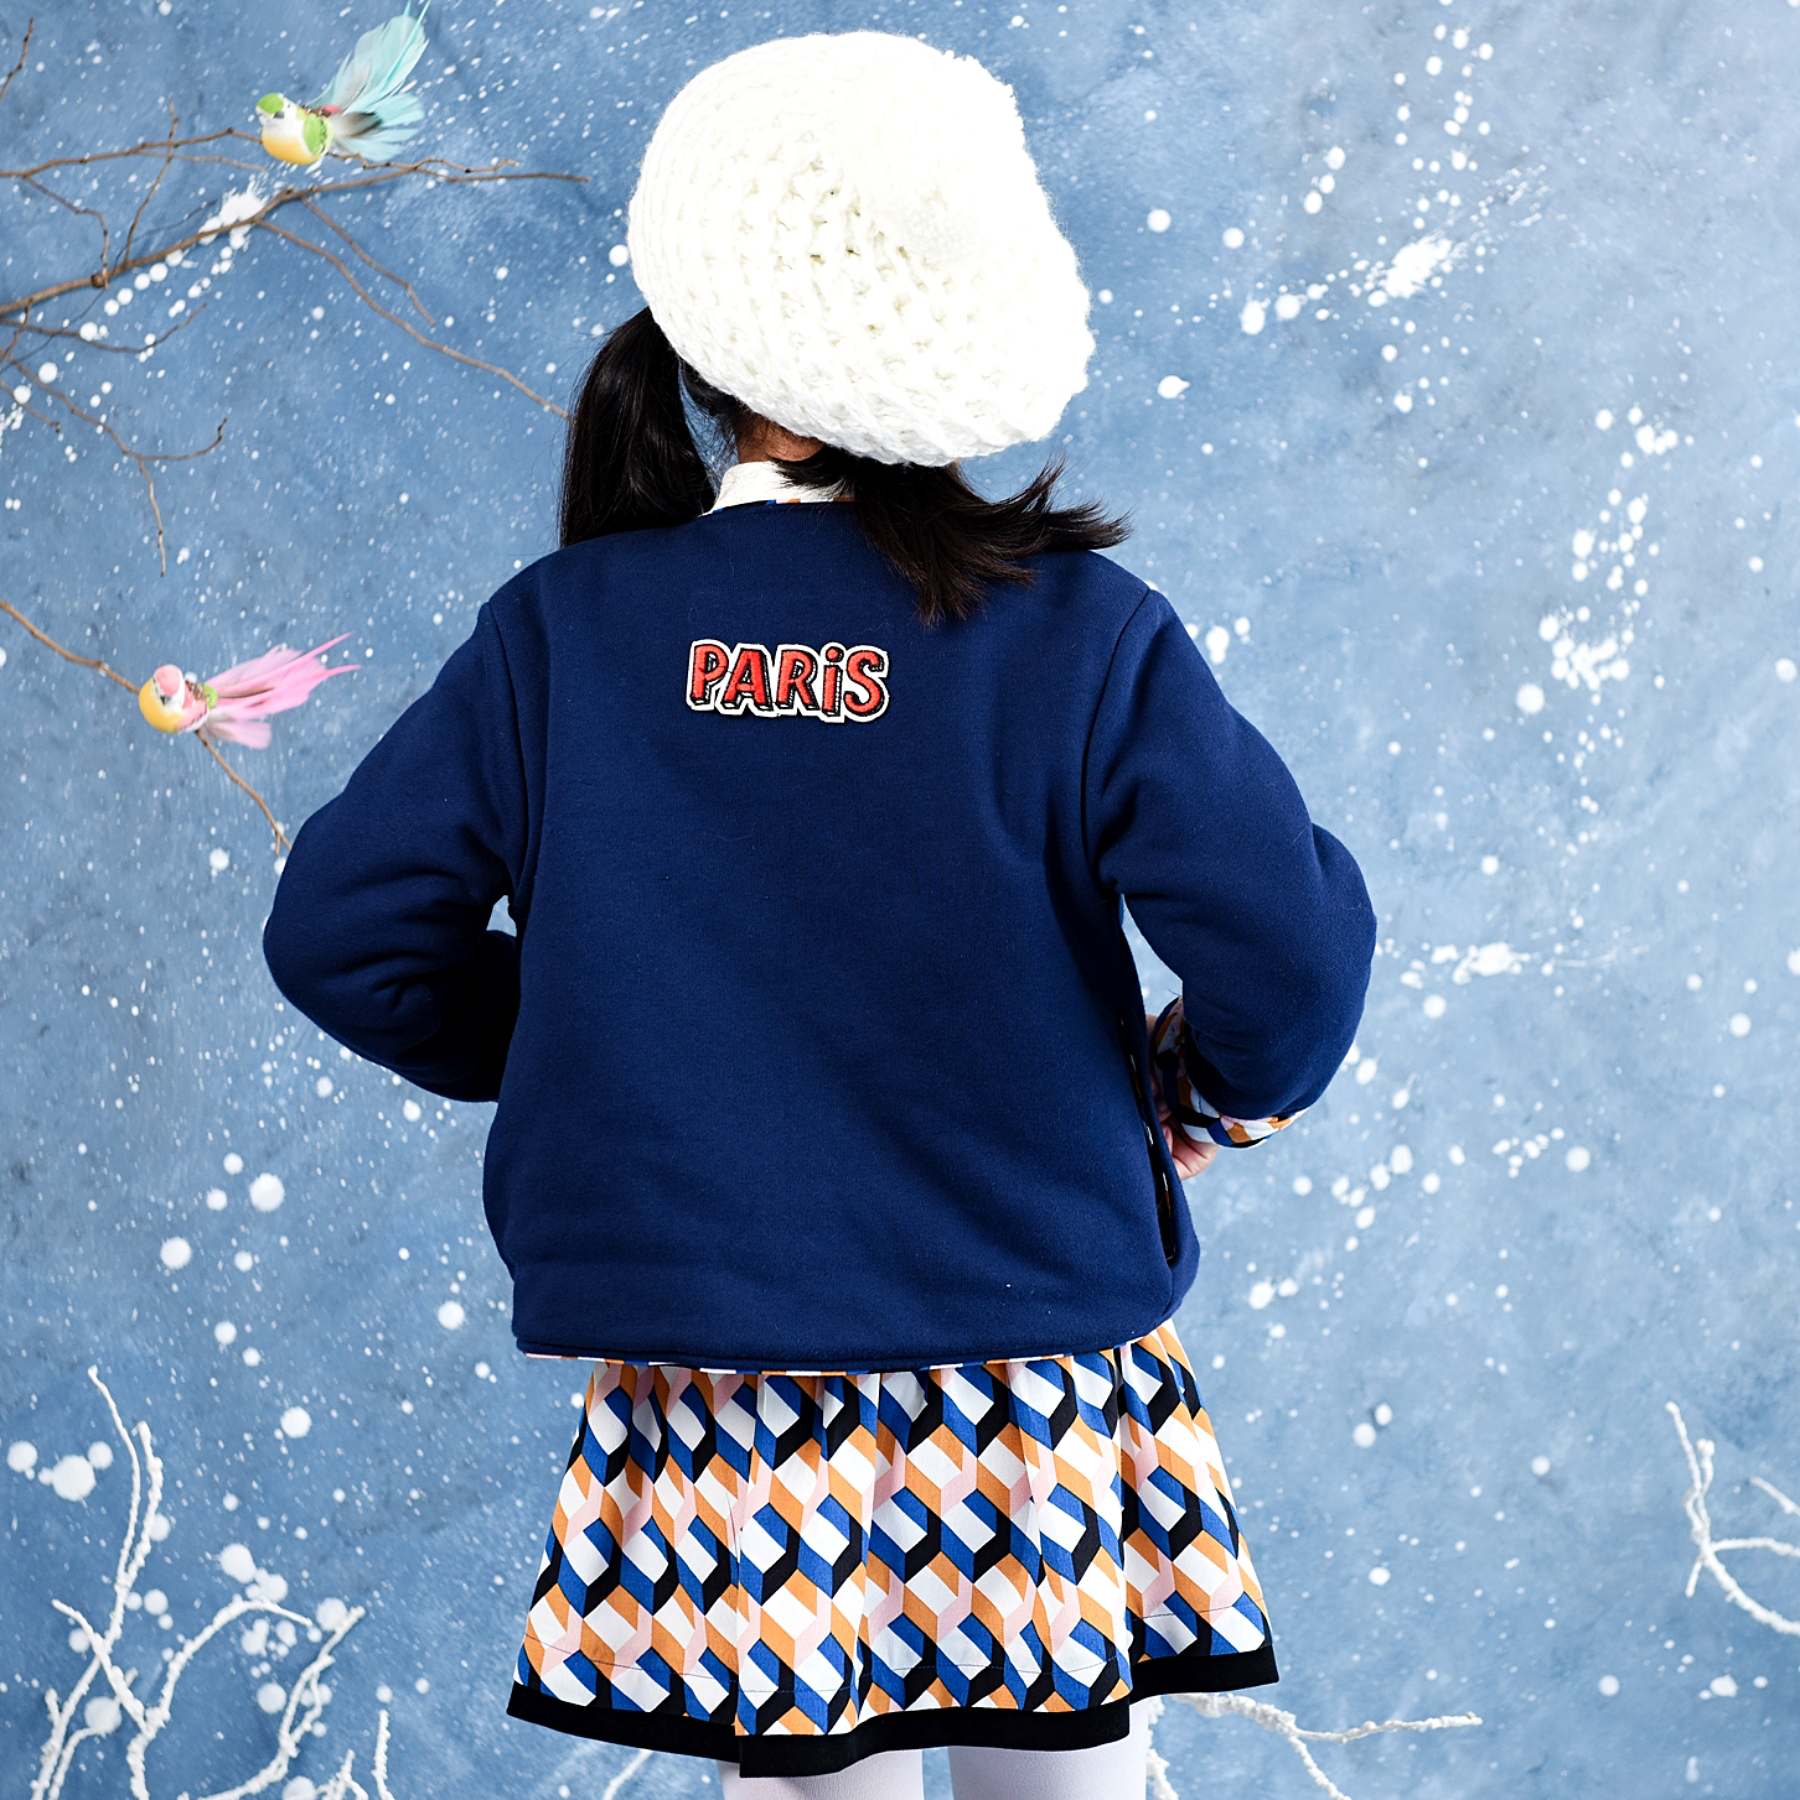 Nice long sleeve jacket in navy blue fleece lined with multicolored cotton with Paris crest on the back. Short jacket for girls from the children's fashion brand LA FAUTE A VOLTAIRE